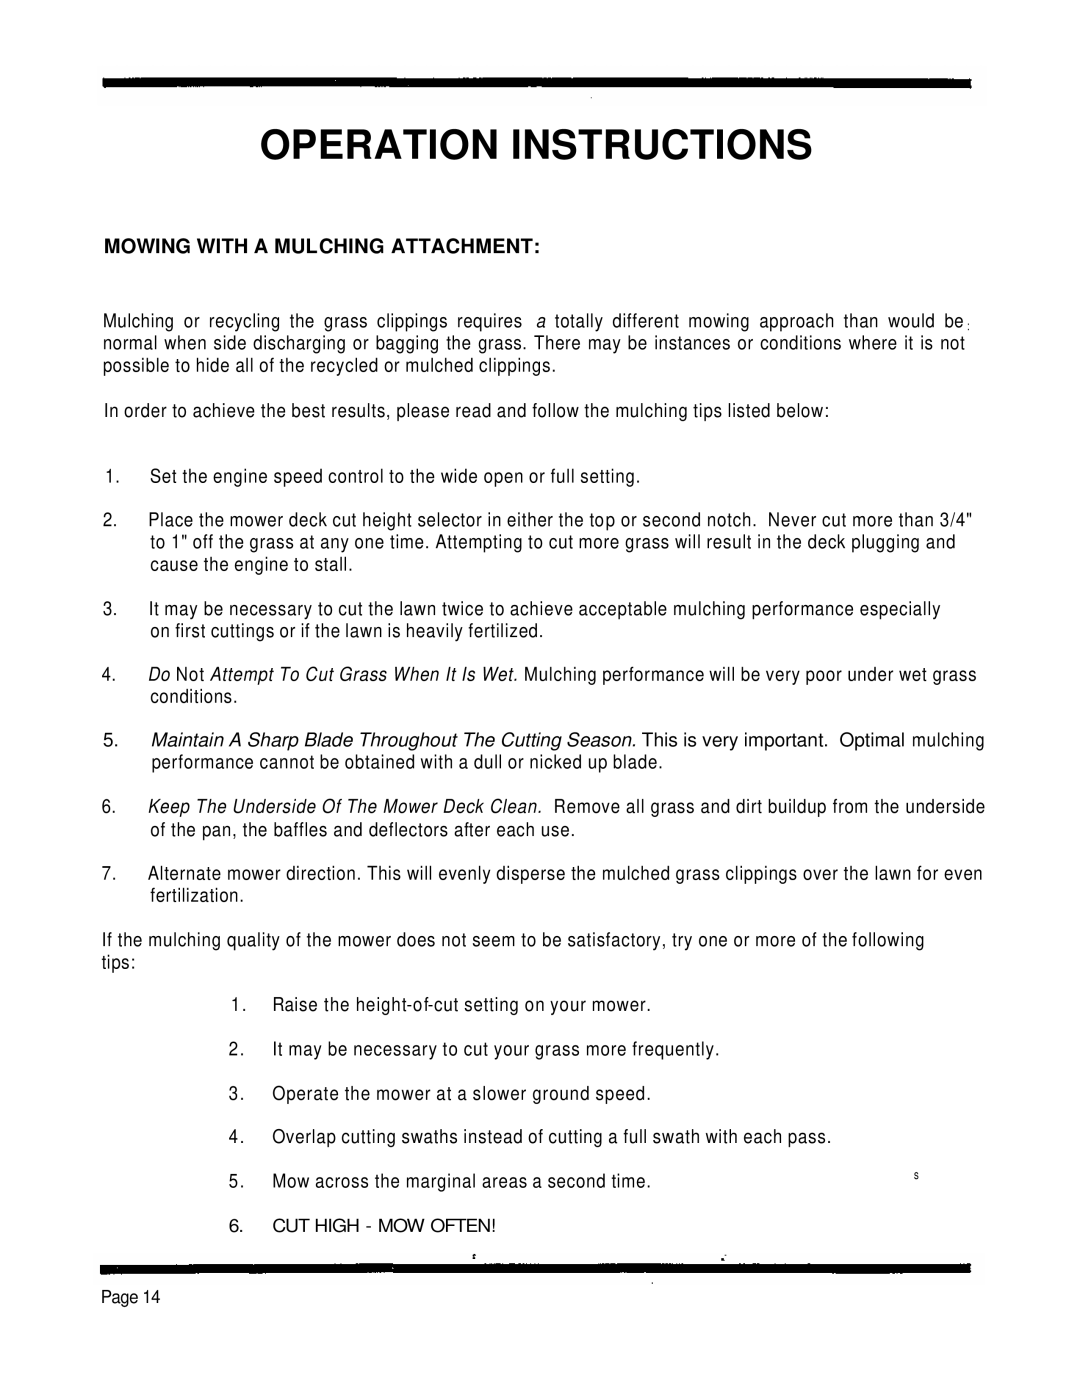 Dixon 4000 Series manual Operation Instructions, Mowing With A Mulching Attachment 